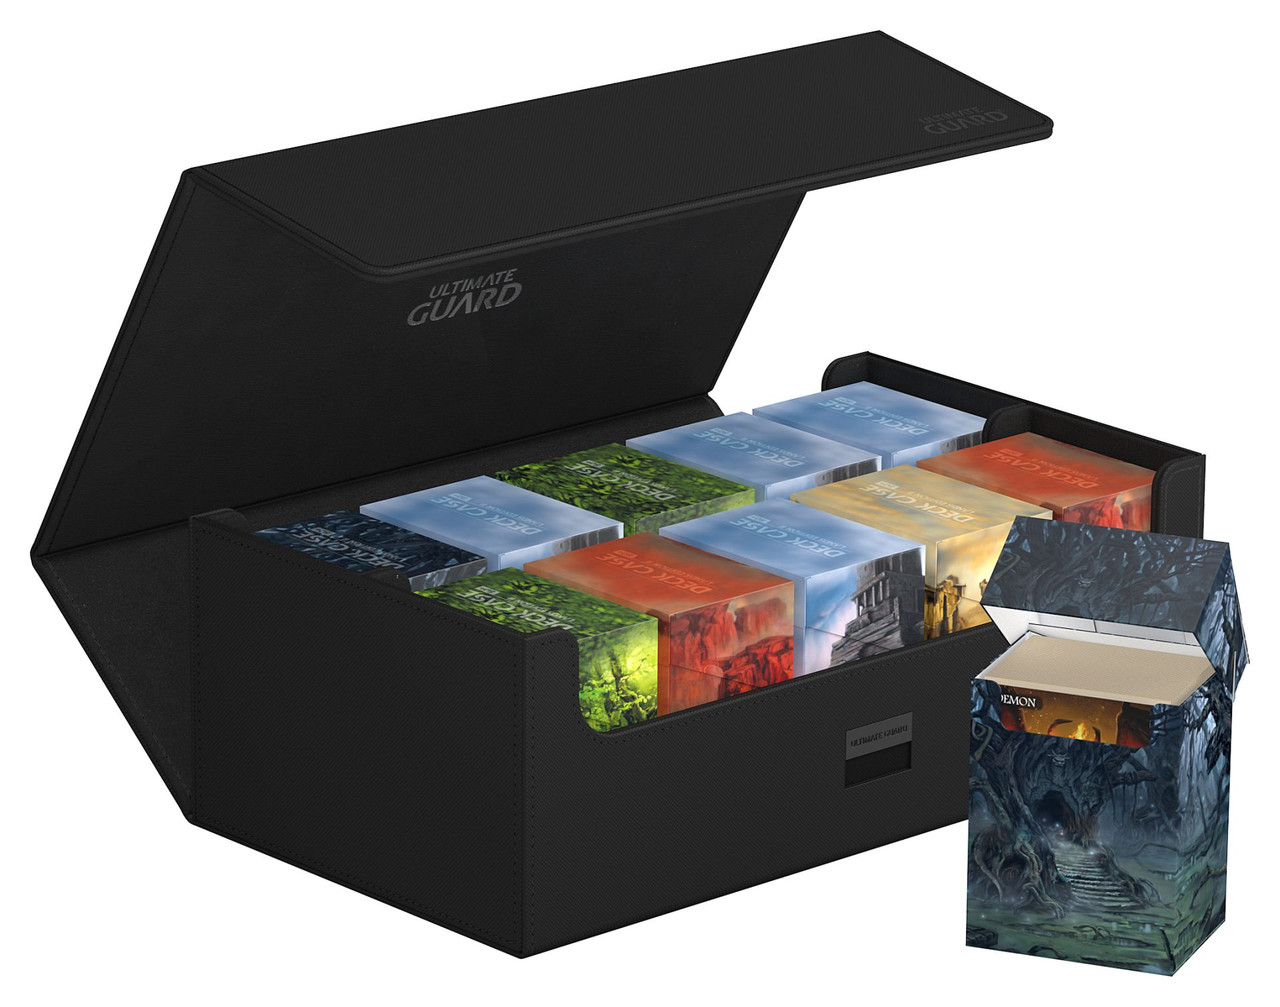 What Is The Best Deck Box For Magic: The Gathering? Compare